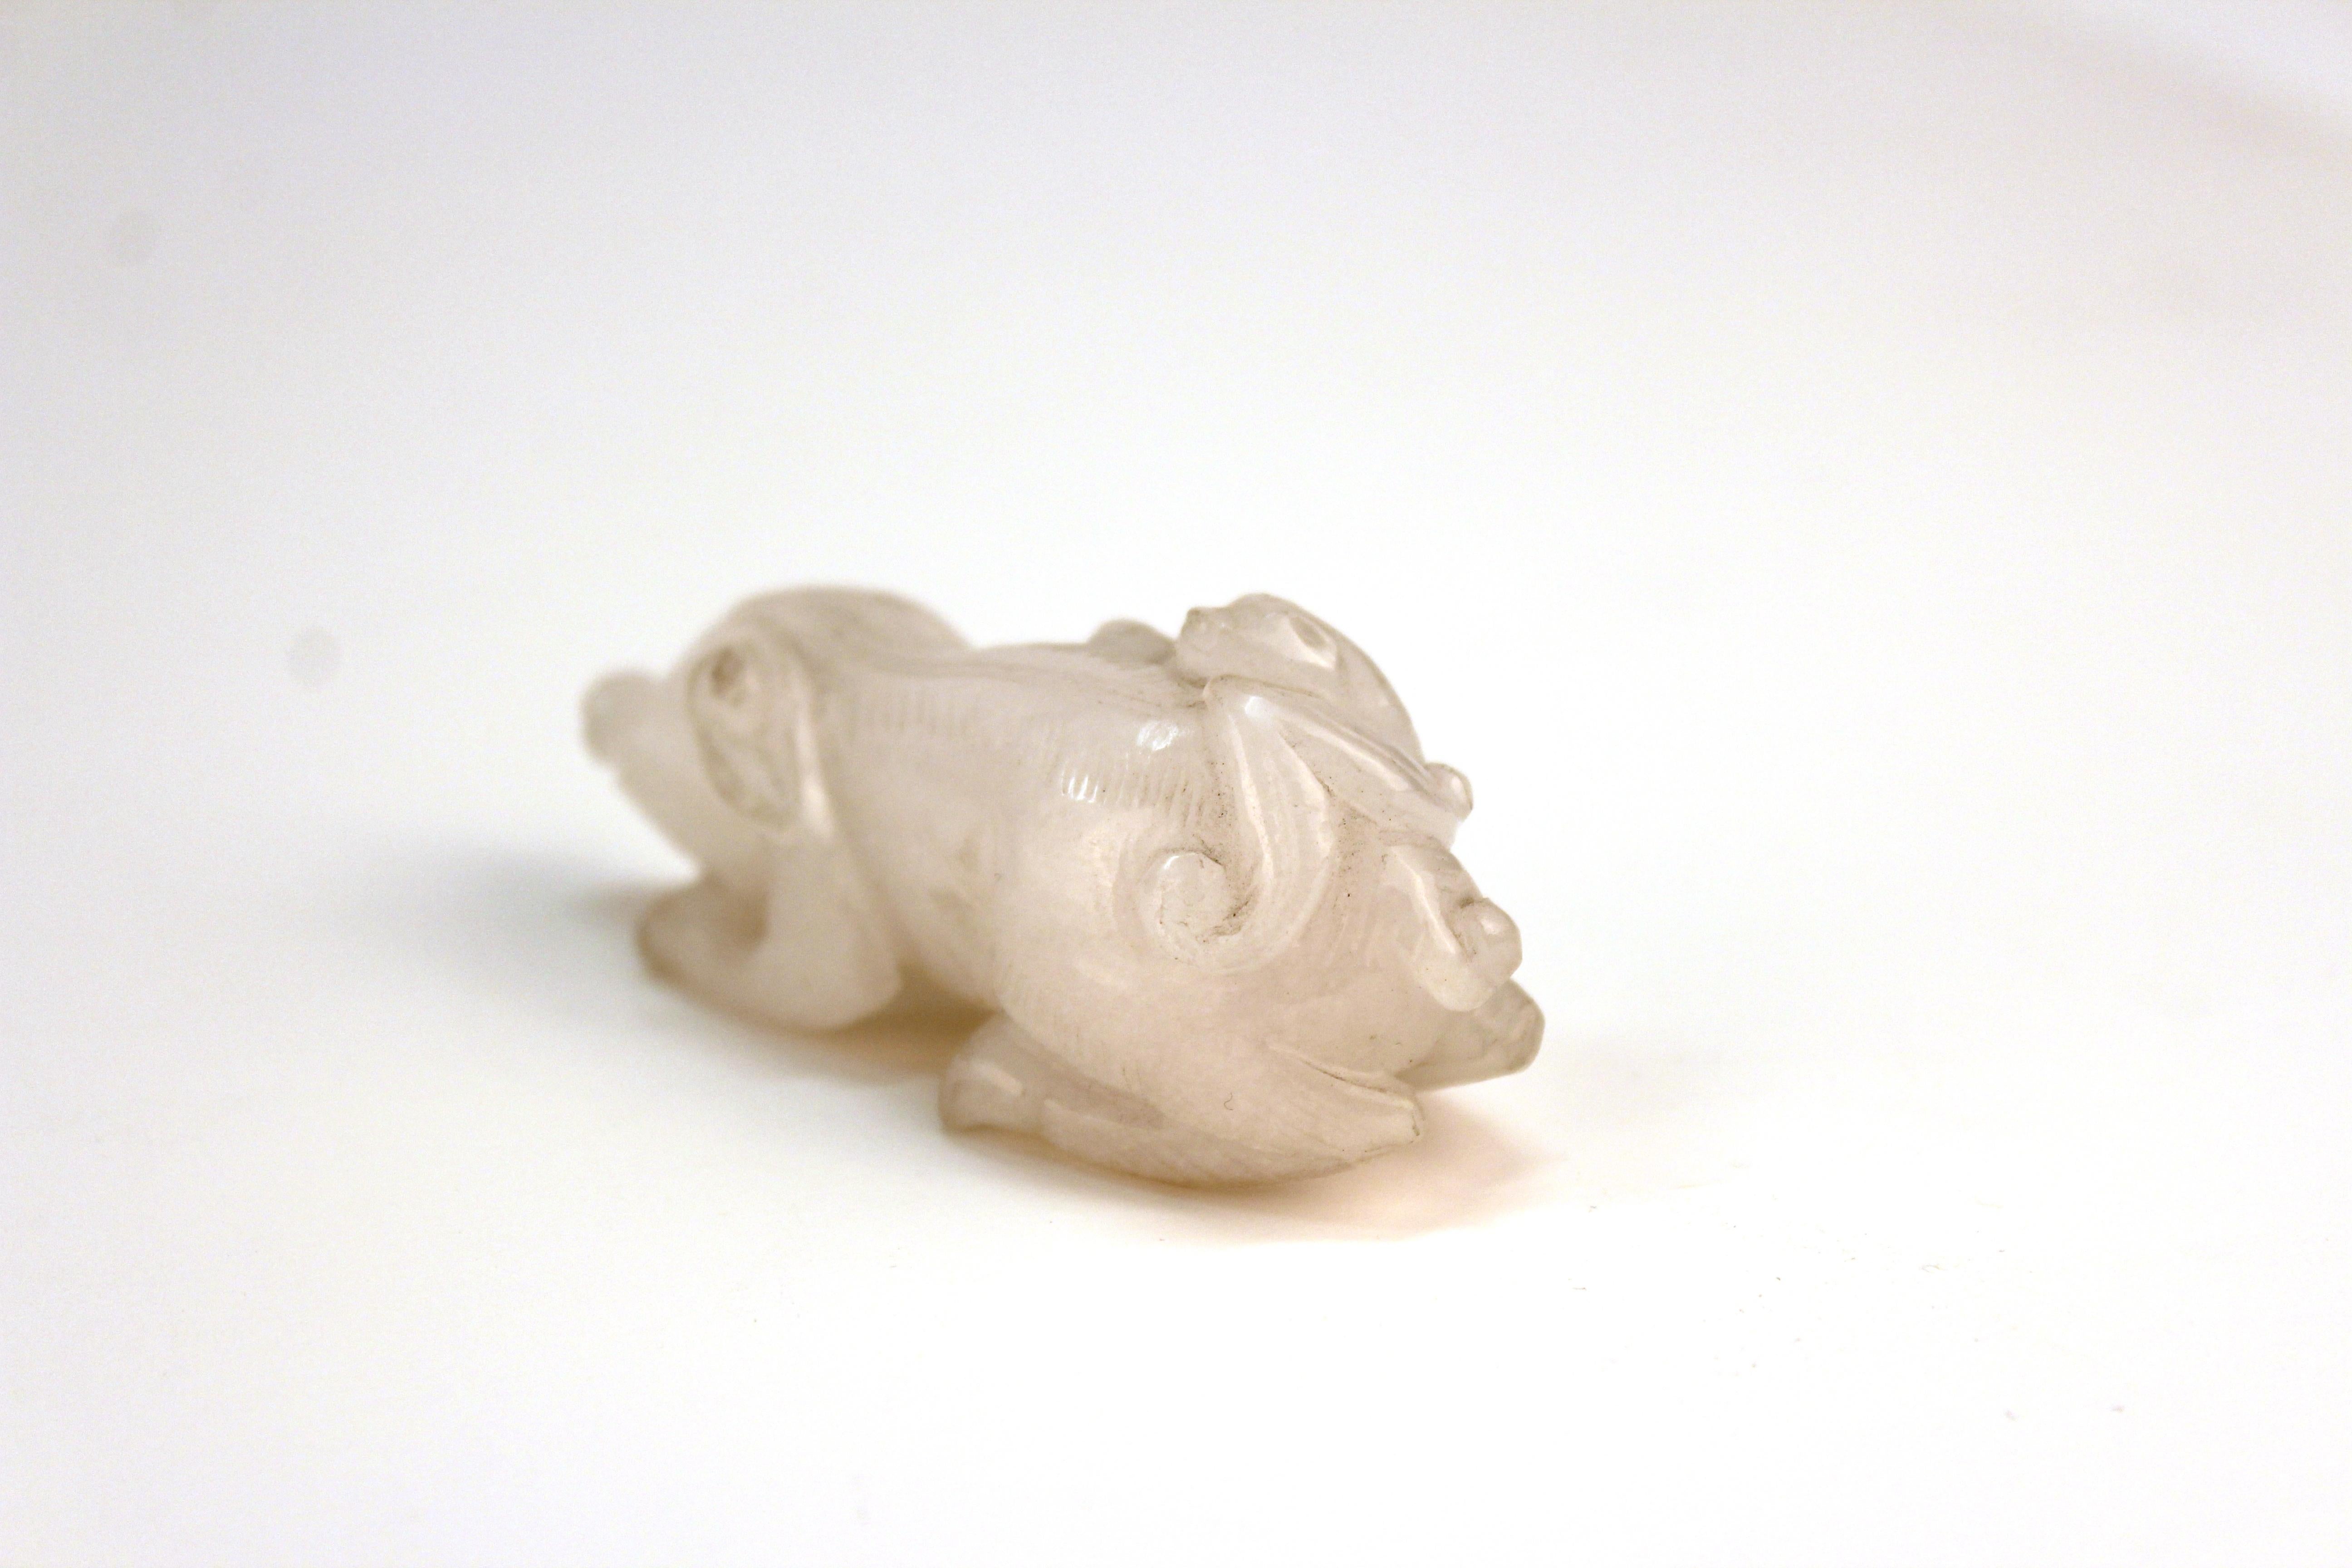 Chinese Export Chinese White Jadeite Sculpture of a Small Pig with Bat